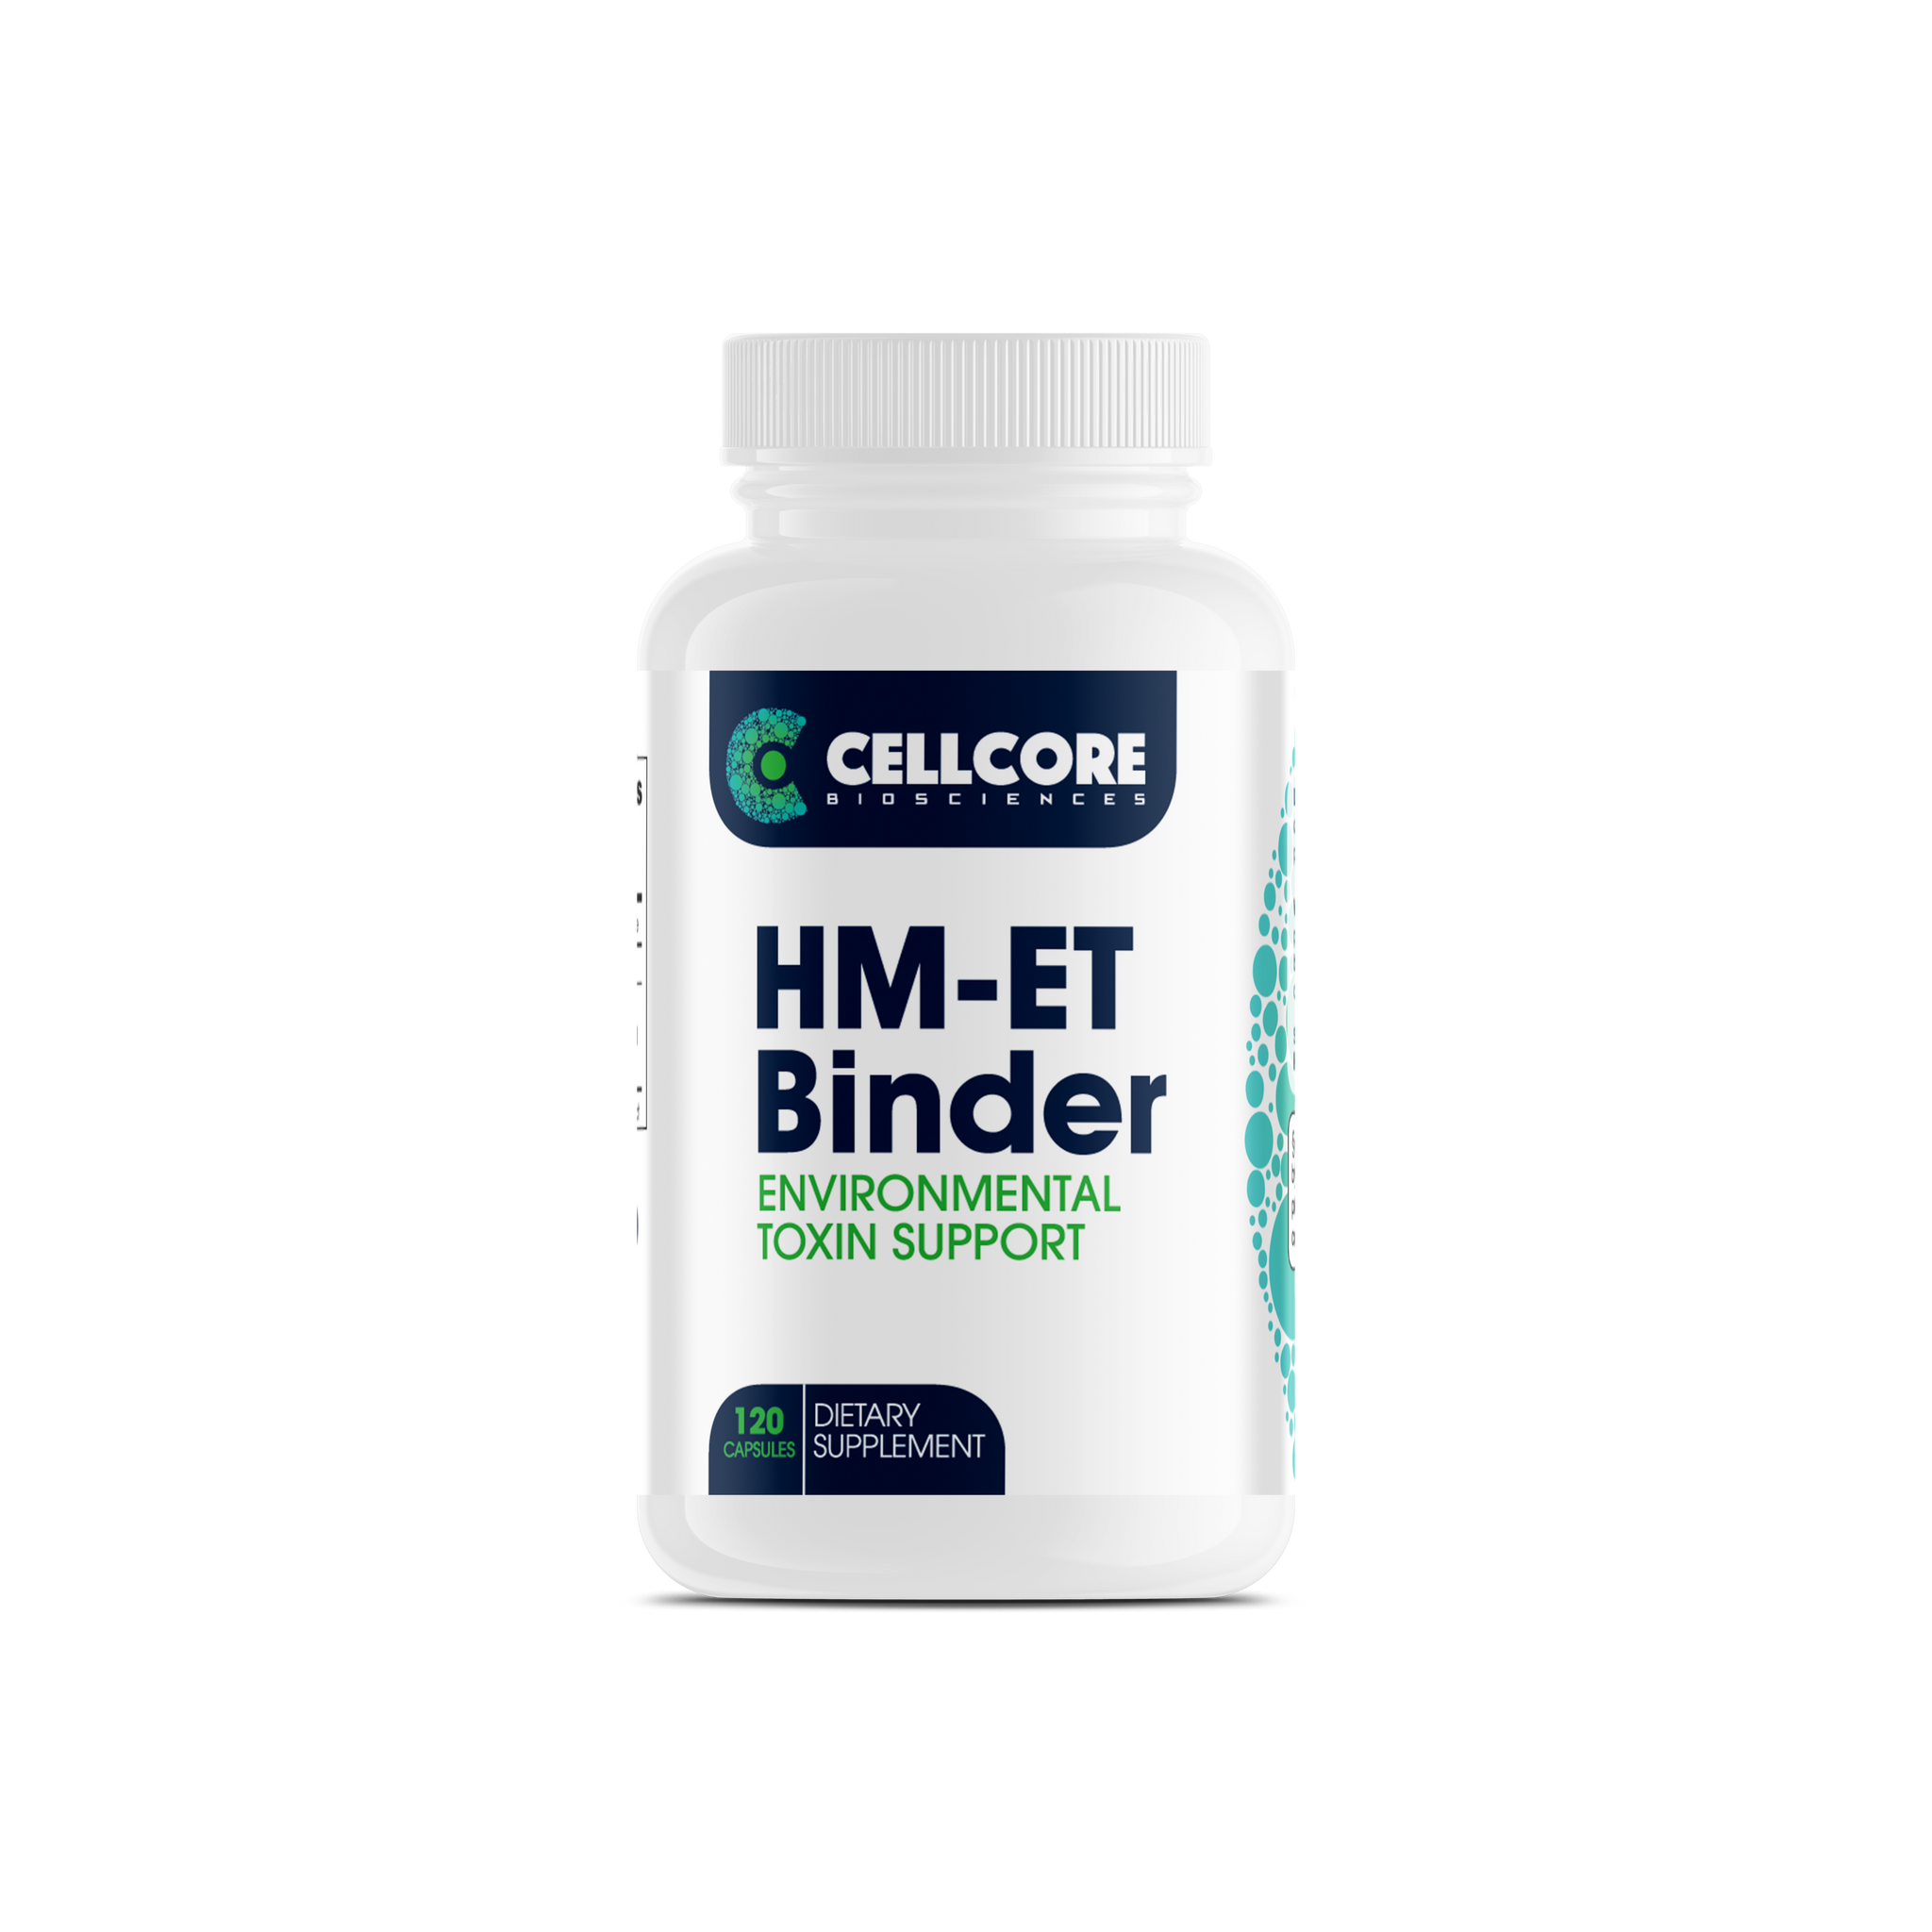 HM-ET Binder - Environmental Toxin Support (120 Capsules) – Dr